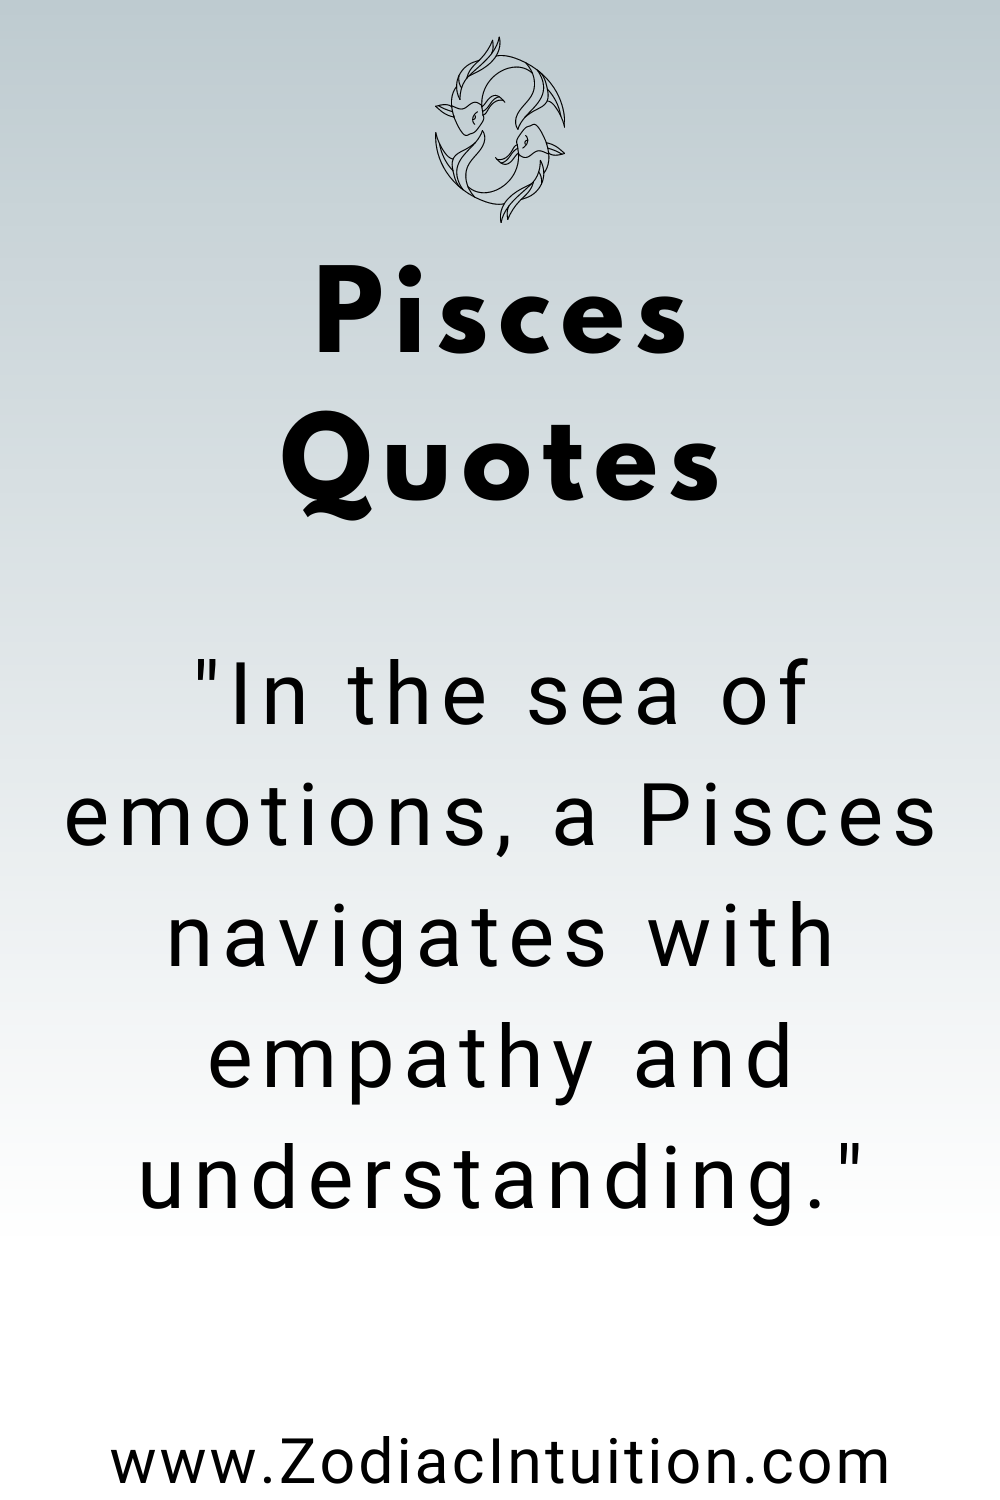 Top 5 Pisces Quotes And Inspiration